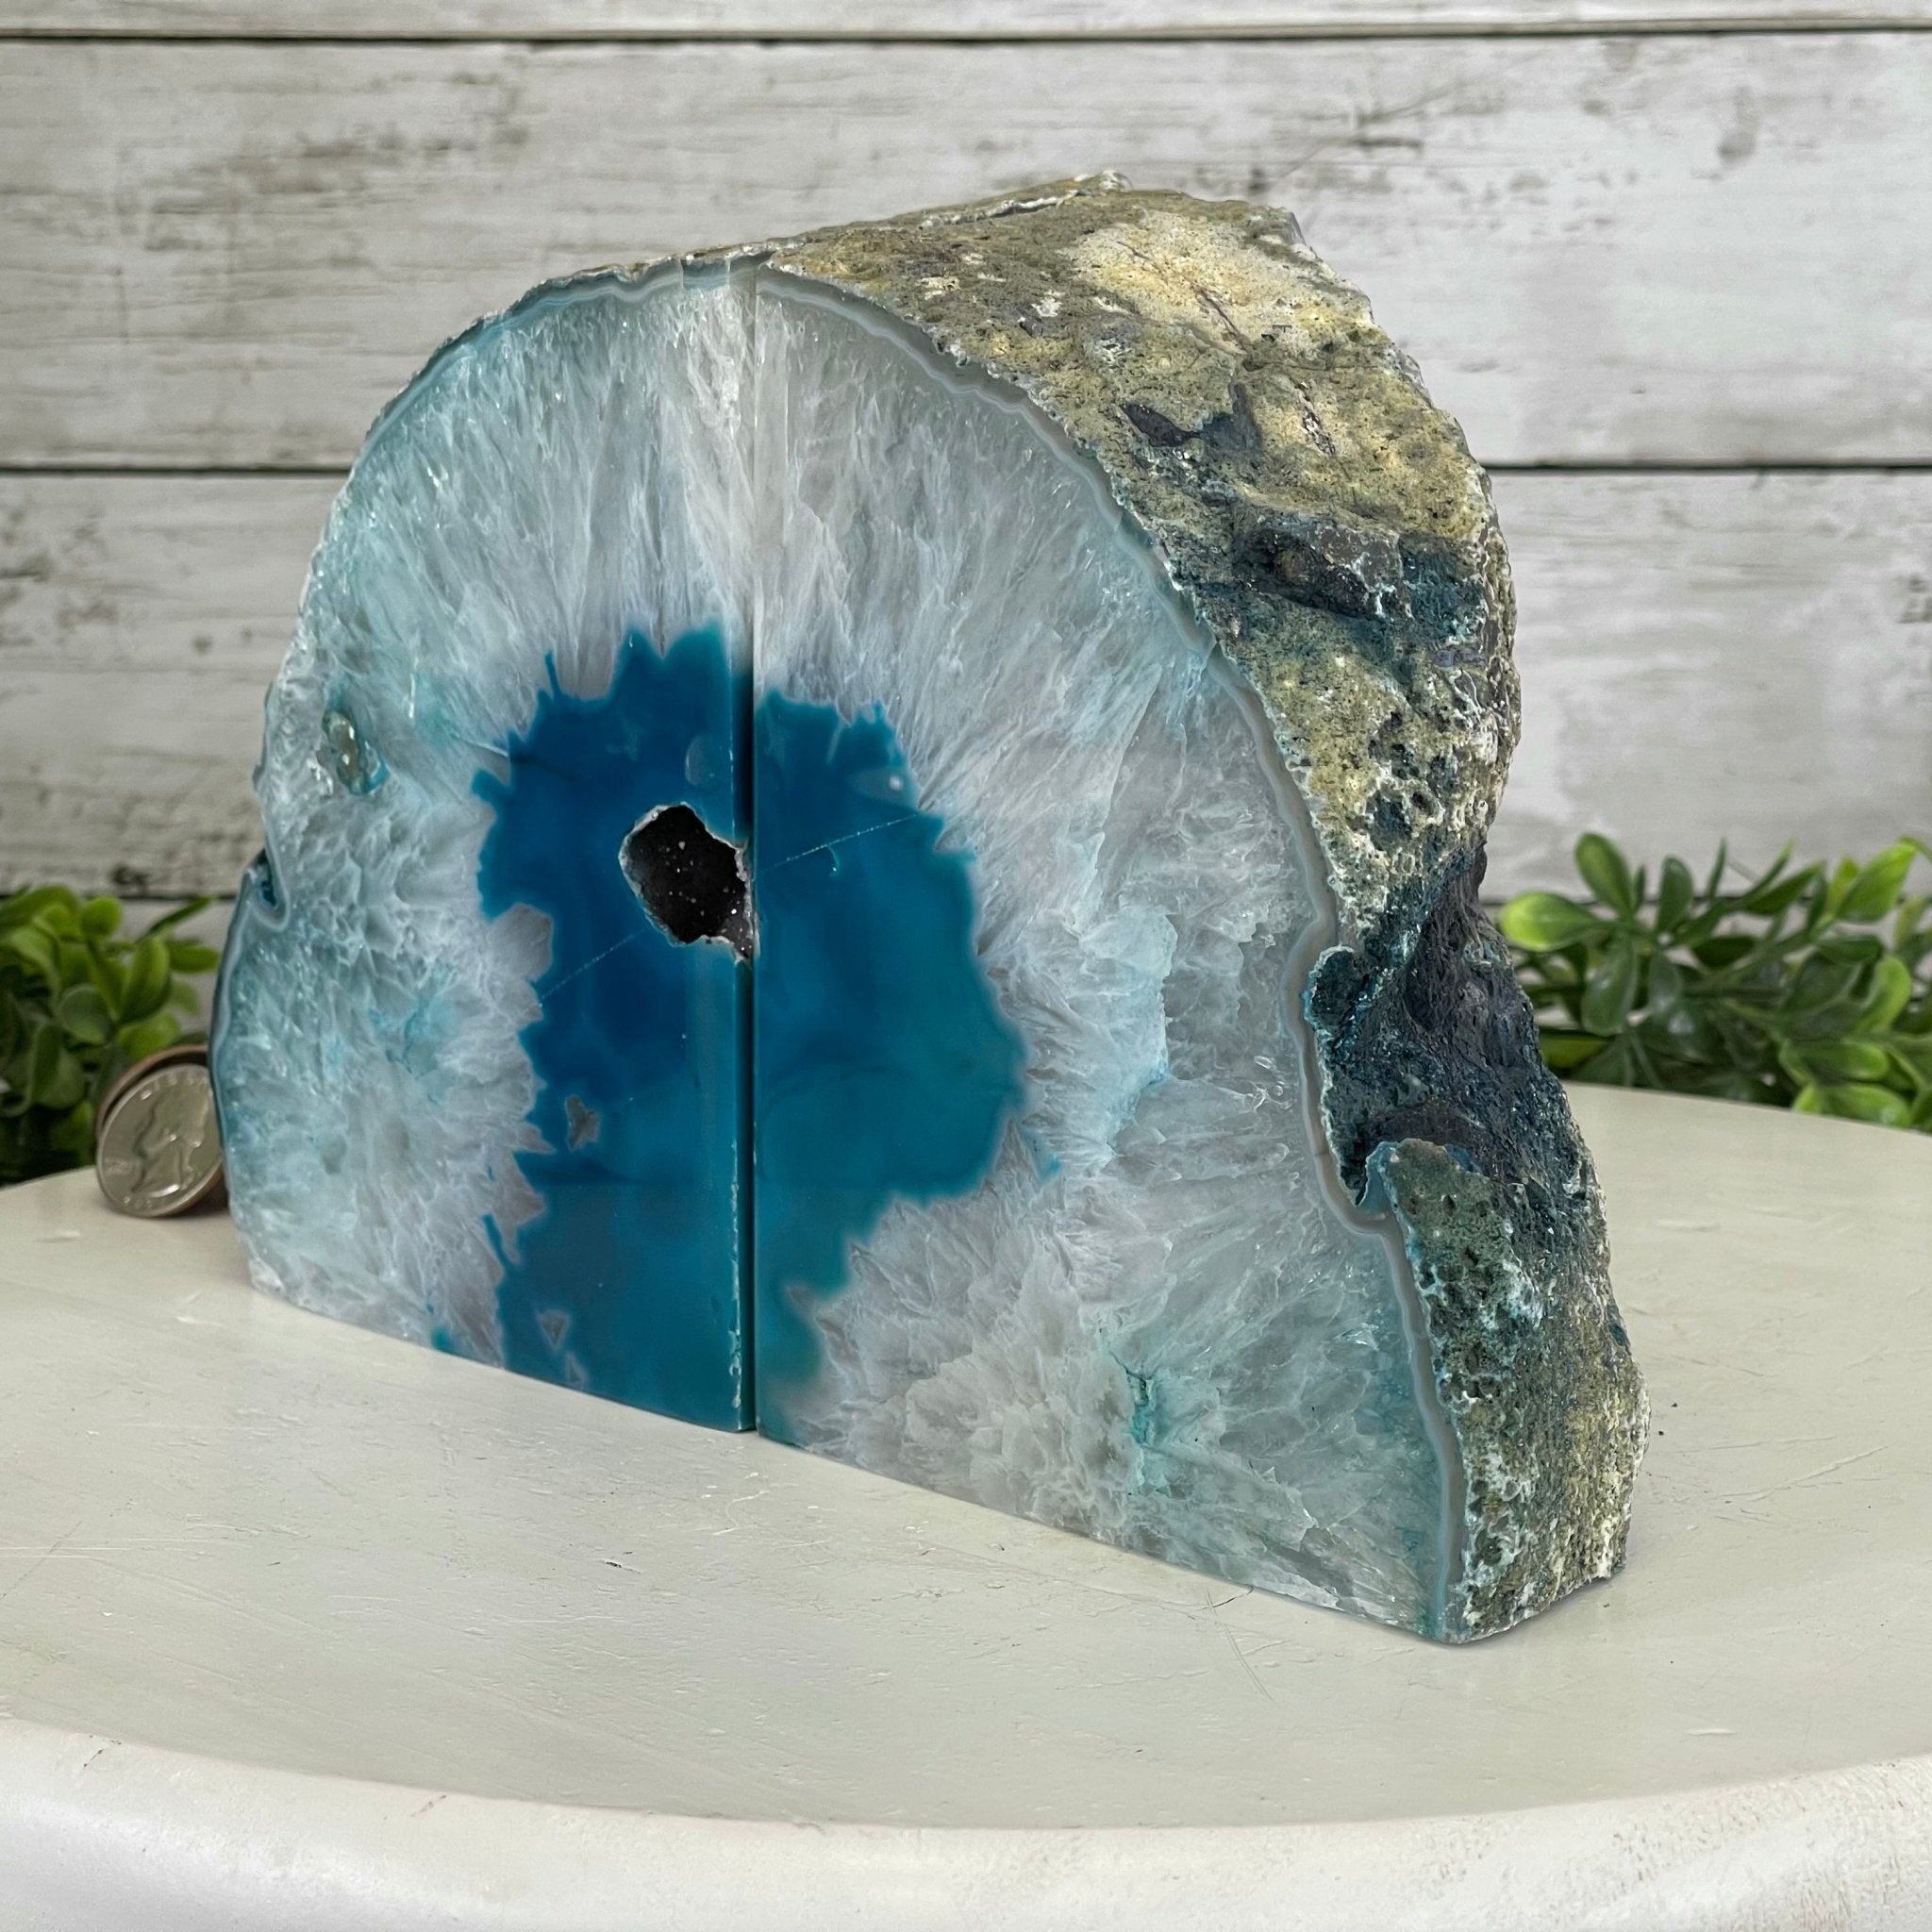 Teal Dyed Brazilian Agate Stone Bookends, 12.3 lbs & 5.6" tall Model #5151TL-023 by Brazil Gems - Brazil GemsBrazil GemsTeal Dyed Brazilian Agate Stone Bookends, 12.3 lbs & 5.6" tall Model #5151TL-023 by Brazil GemsBookends5151TL-023